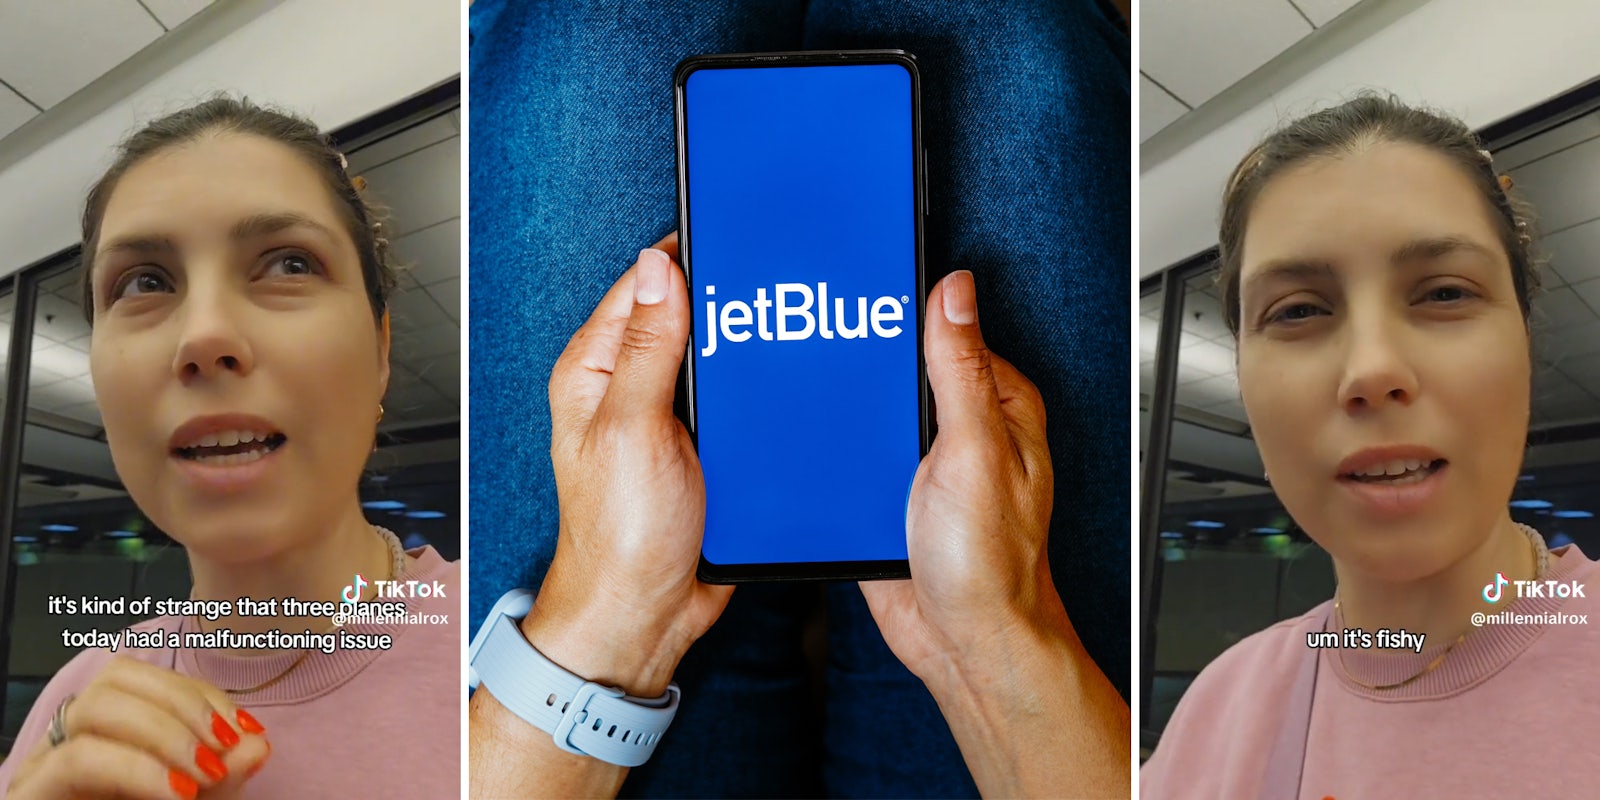 woman with caption 'it's kind of strange that three planes today had a malfunctioning issue' (l) person holding phone with jetBlue logo (c) woman with caption 'um it's fishy' (r)